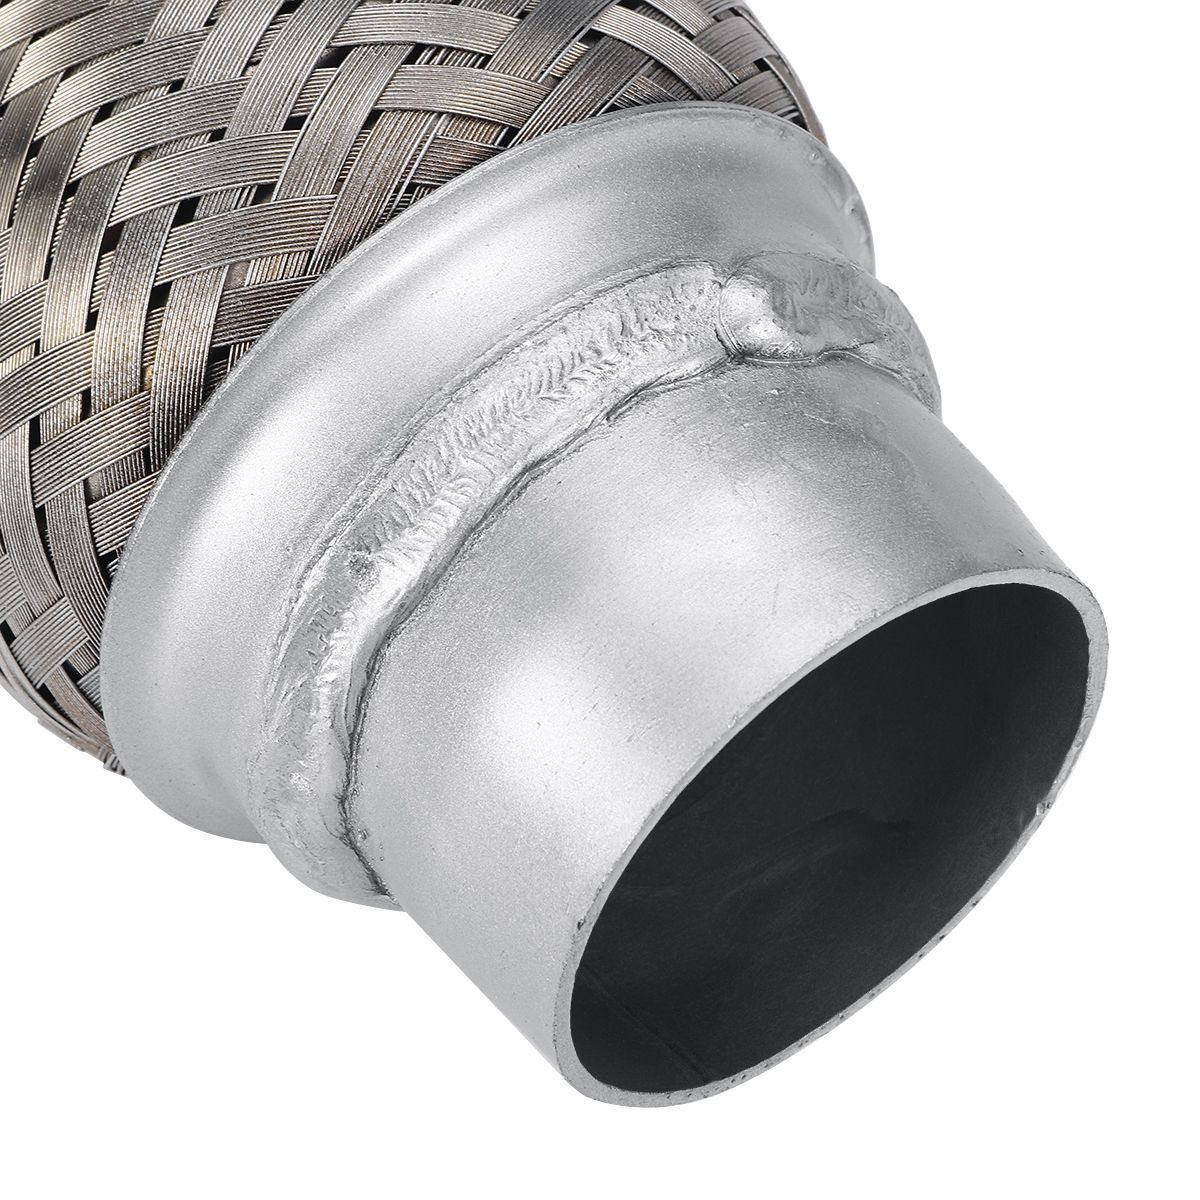 Car-Inlet-55mm-Outlet--61MM-Stainless-Steel-Exhaust-Pipe-Muffler-Adapter-Reducer-Connector-Silver-Fo-1681803